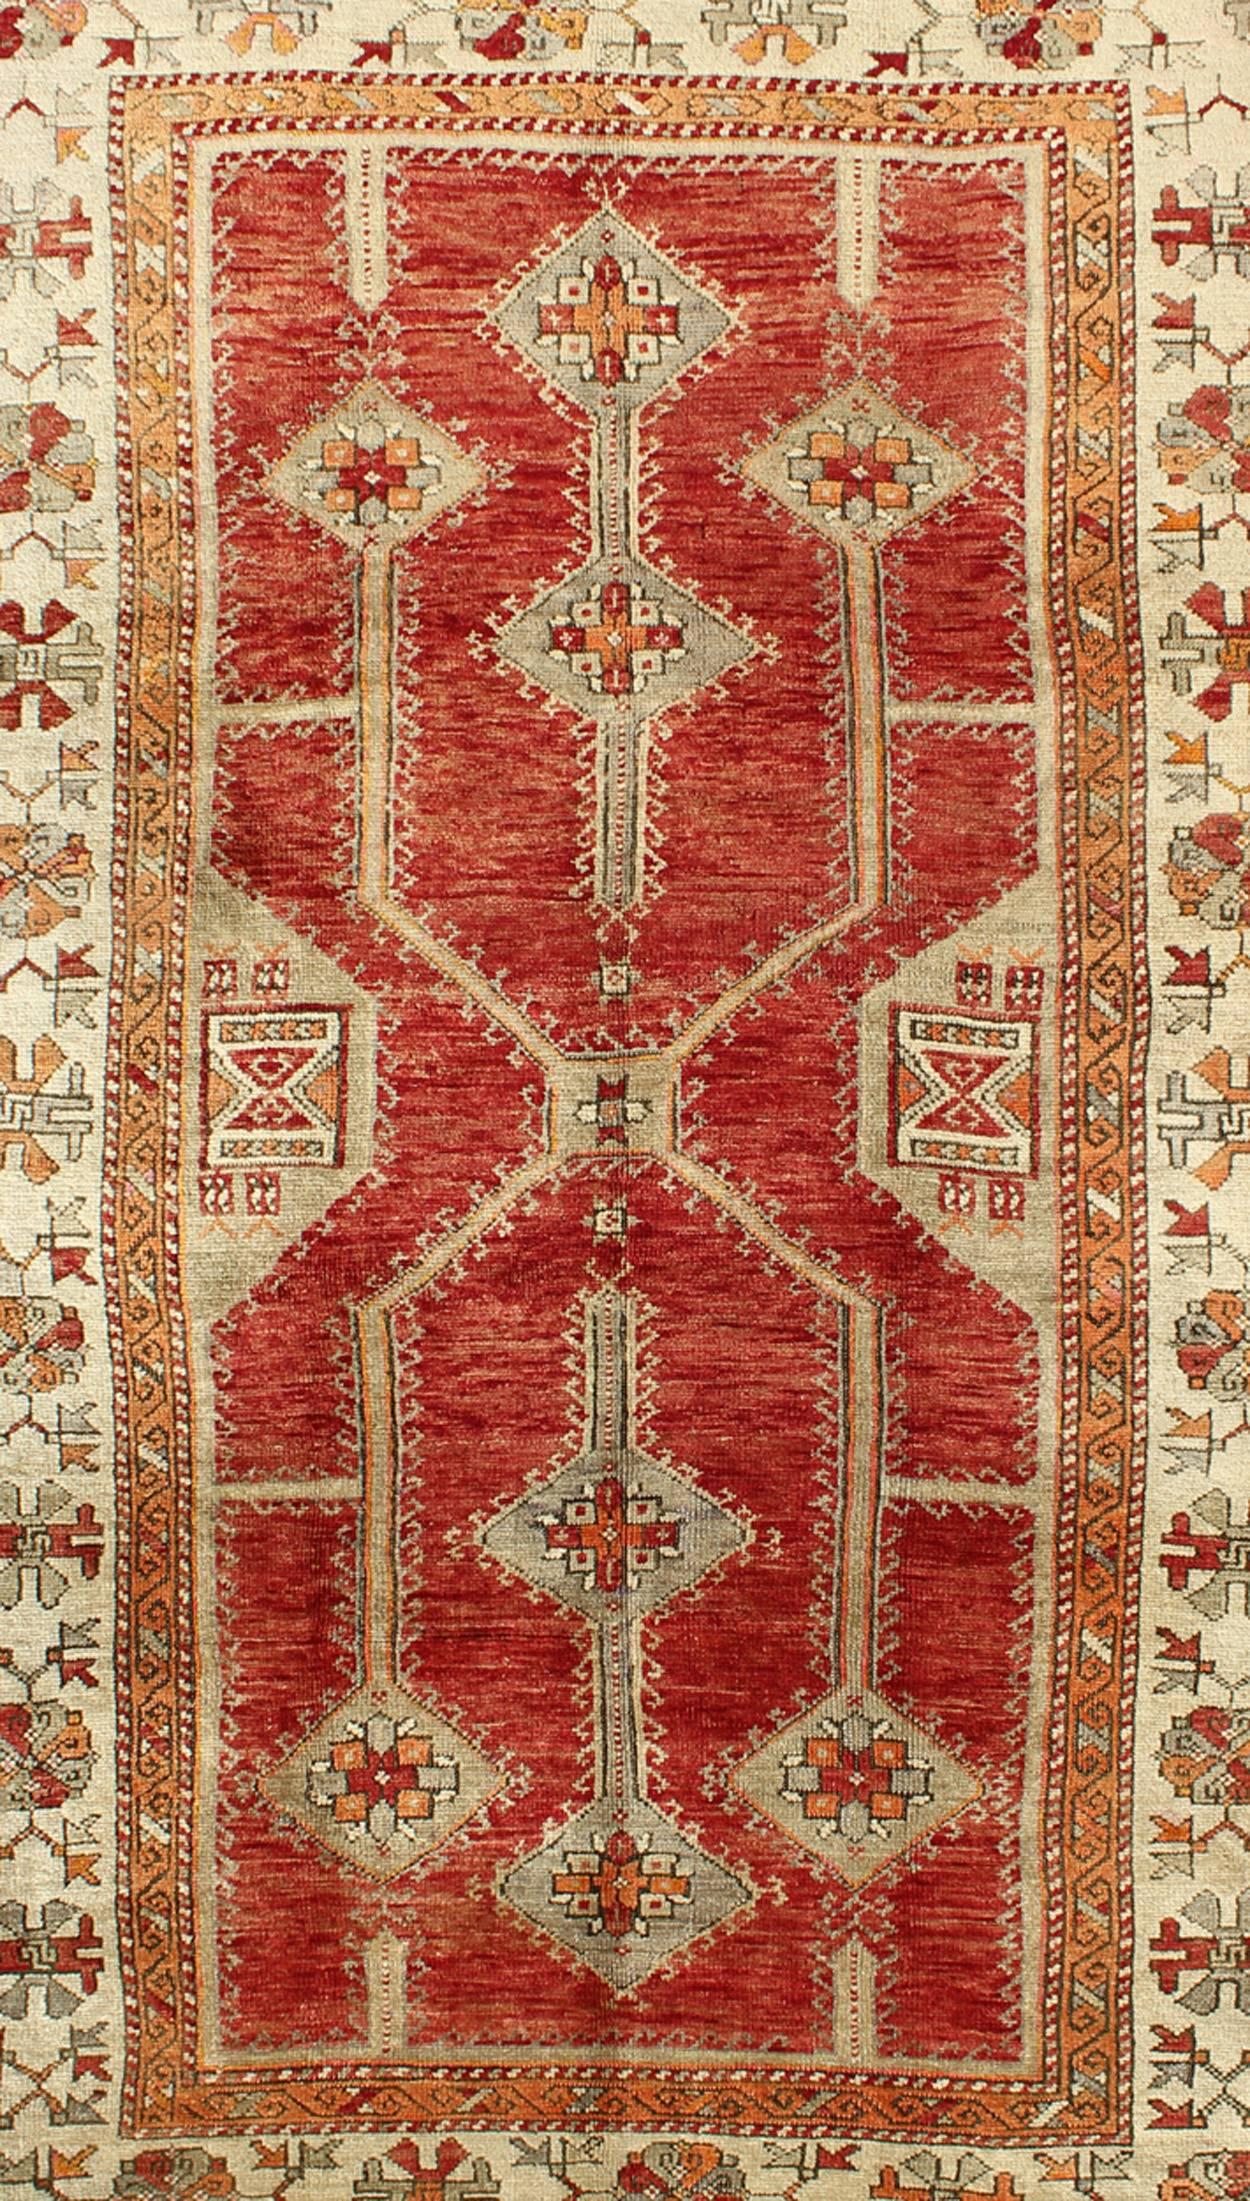 Antique Turkish Oushak Rug With Geometric Design in Red, Light Green & L. Orange In Excellent Condition For Sale In Atlanta, GA